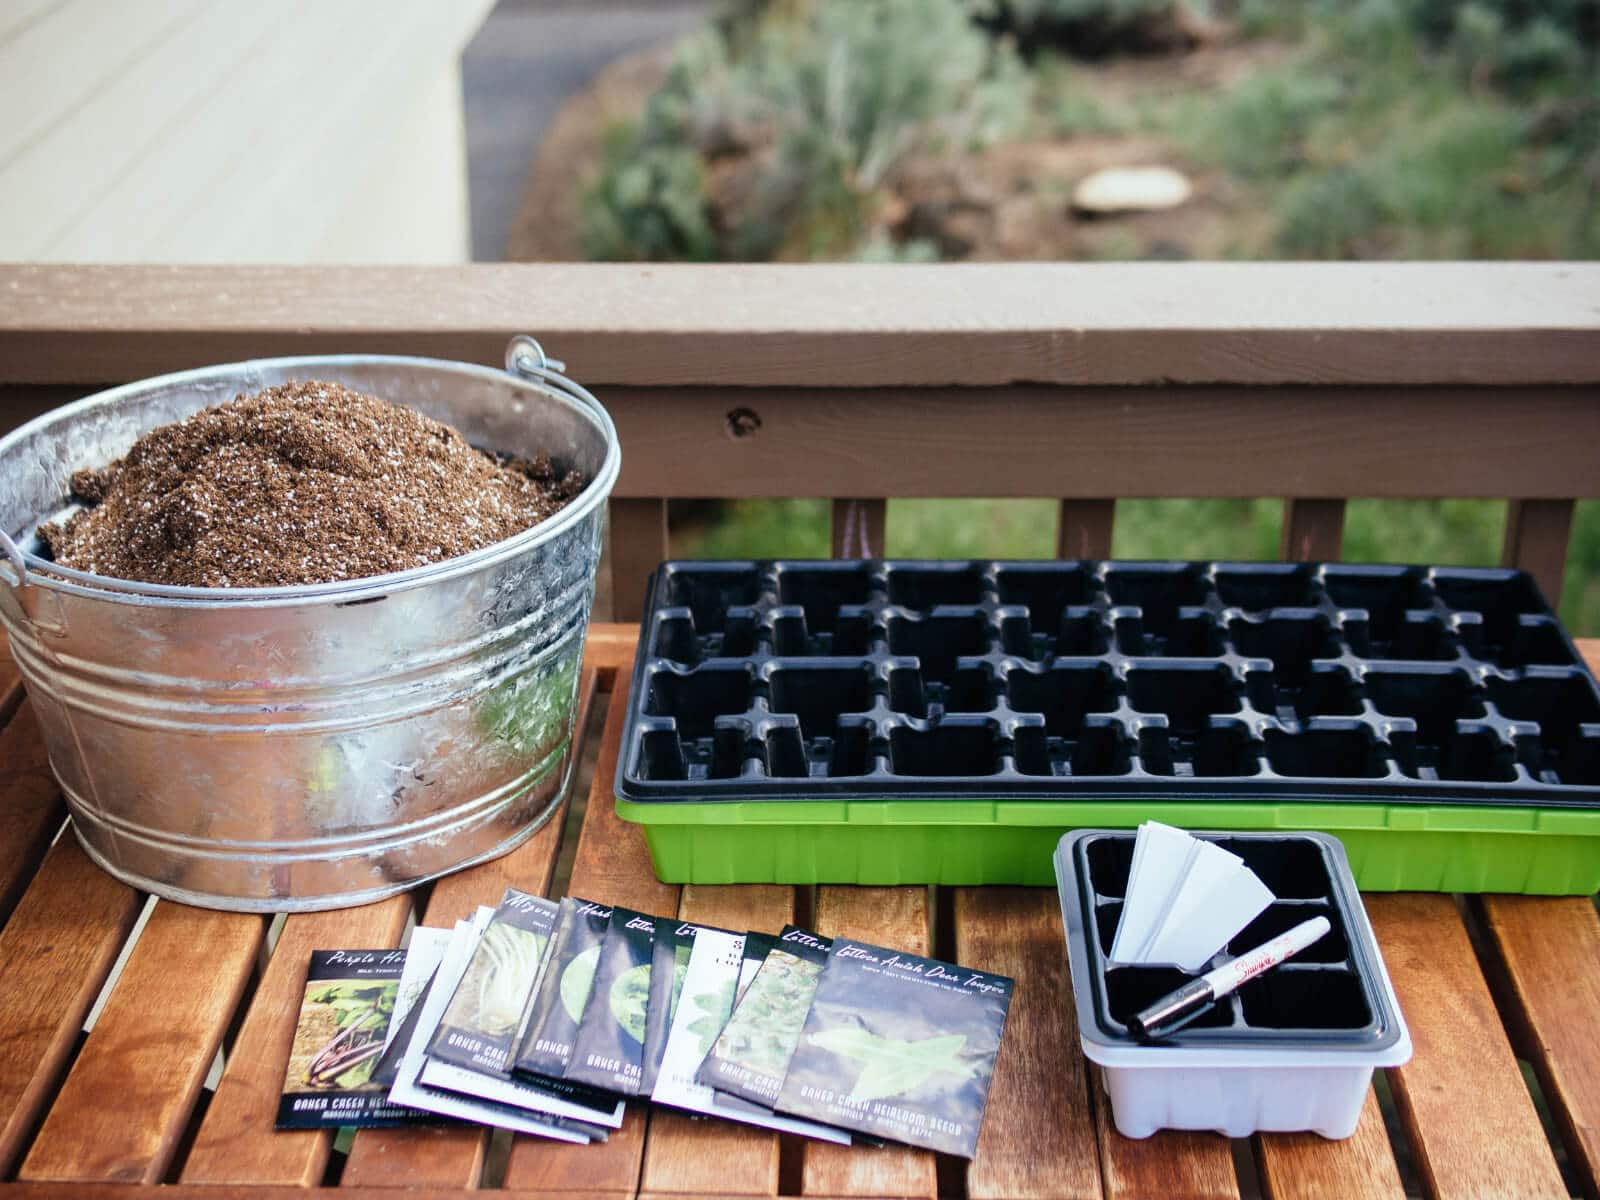 Gather all of your seed starting supplies